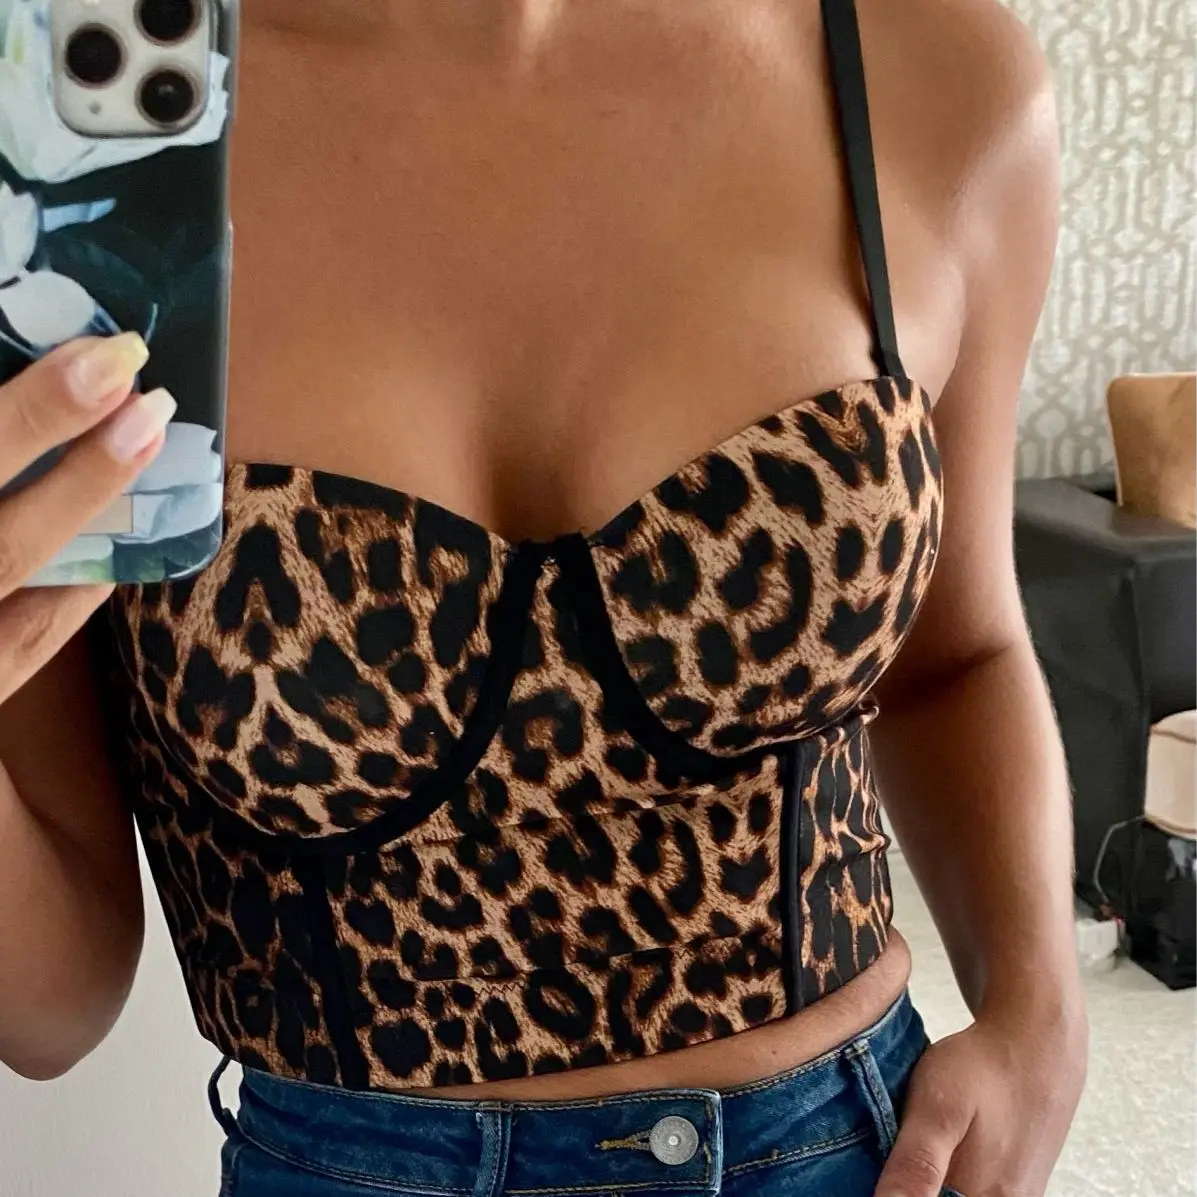 

2020 New Women Camisole Top Leopard Printing Stretch Crop Top Underwired Bustier Bra Night Club Party Tank Tops Female Top